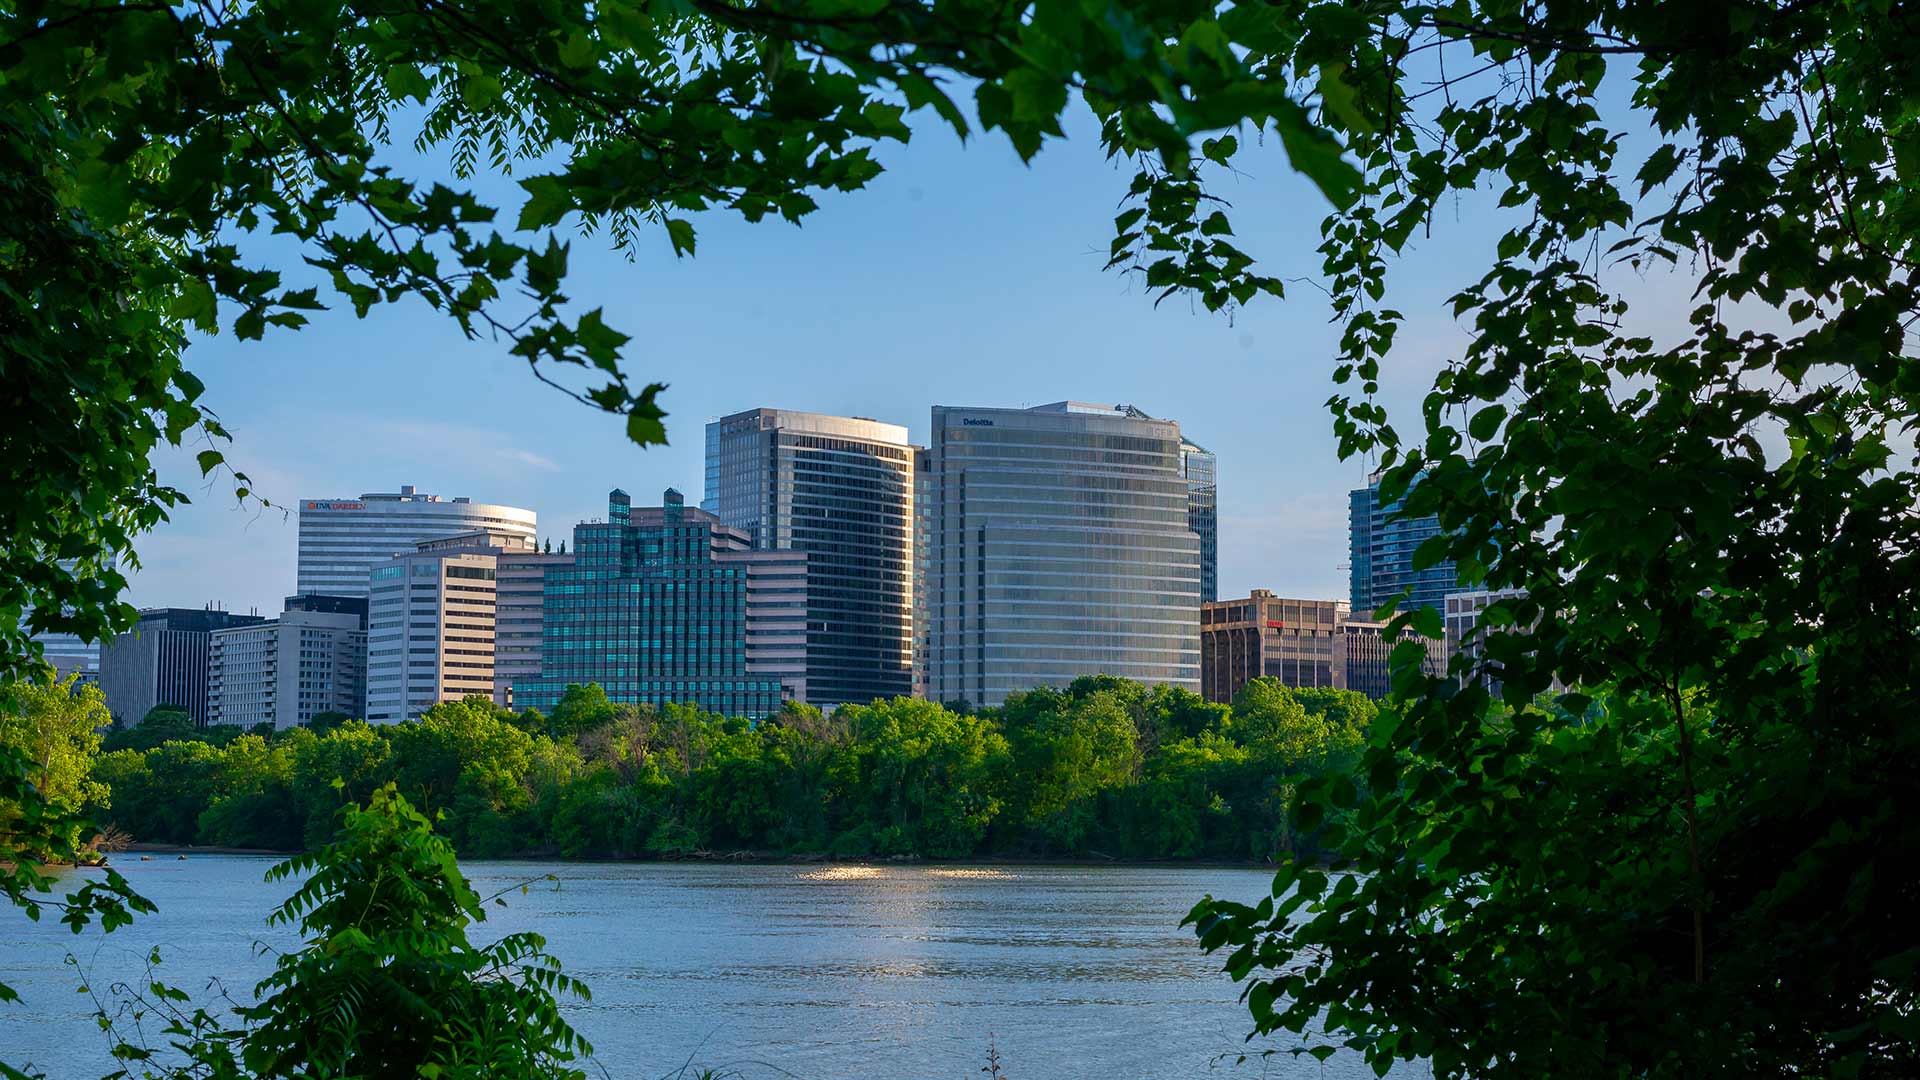 A great view of beautiful downtown Arlington, VA from under a tree.